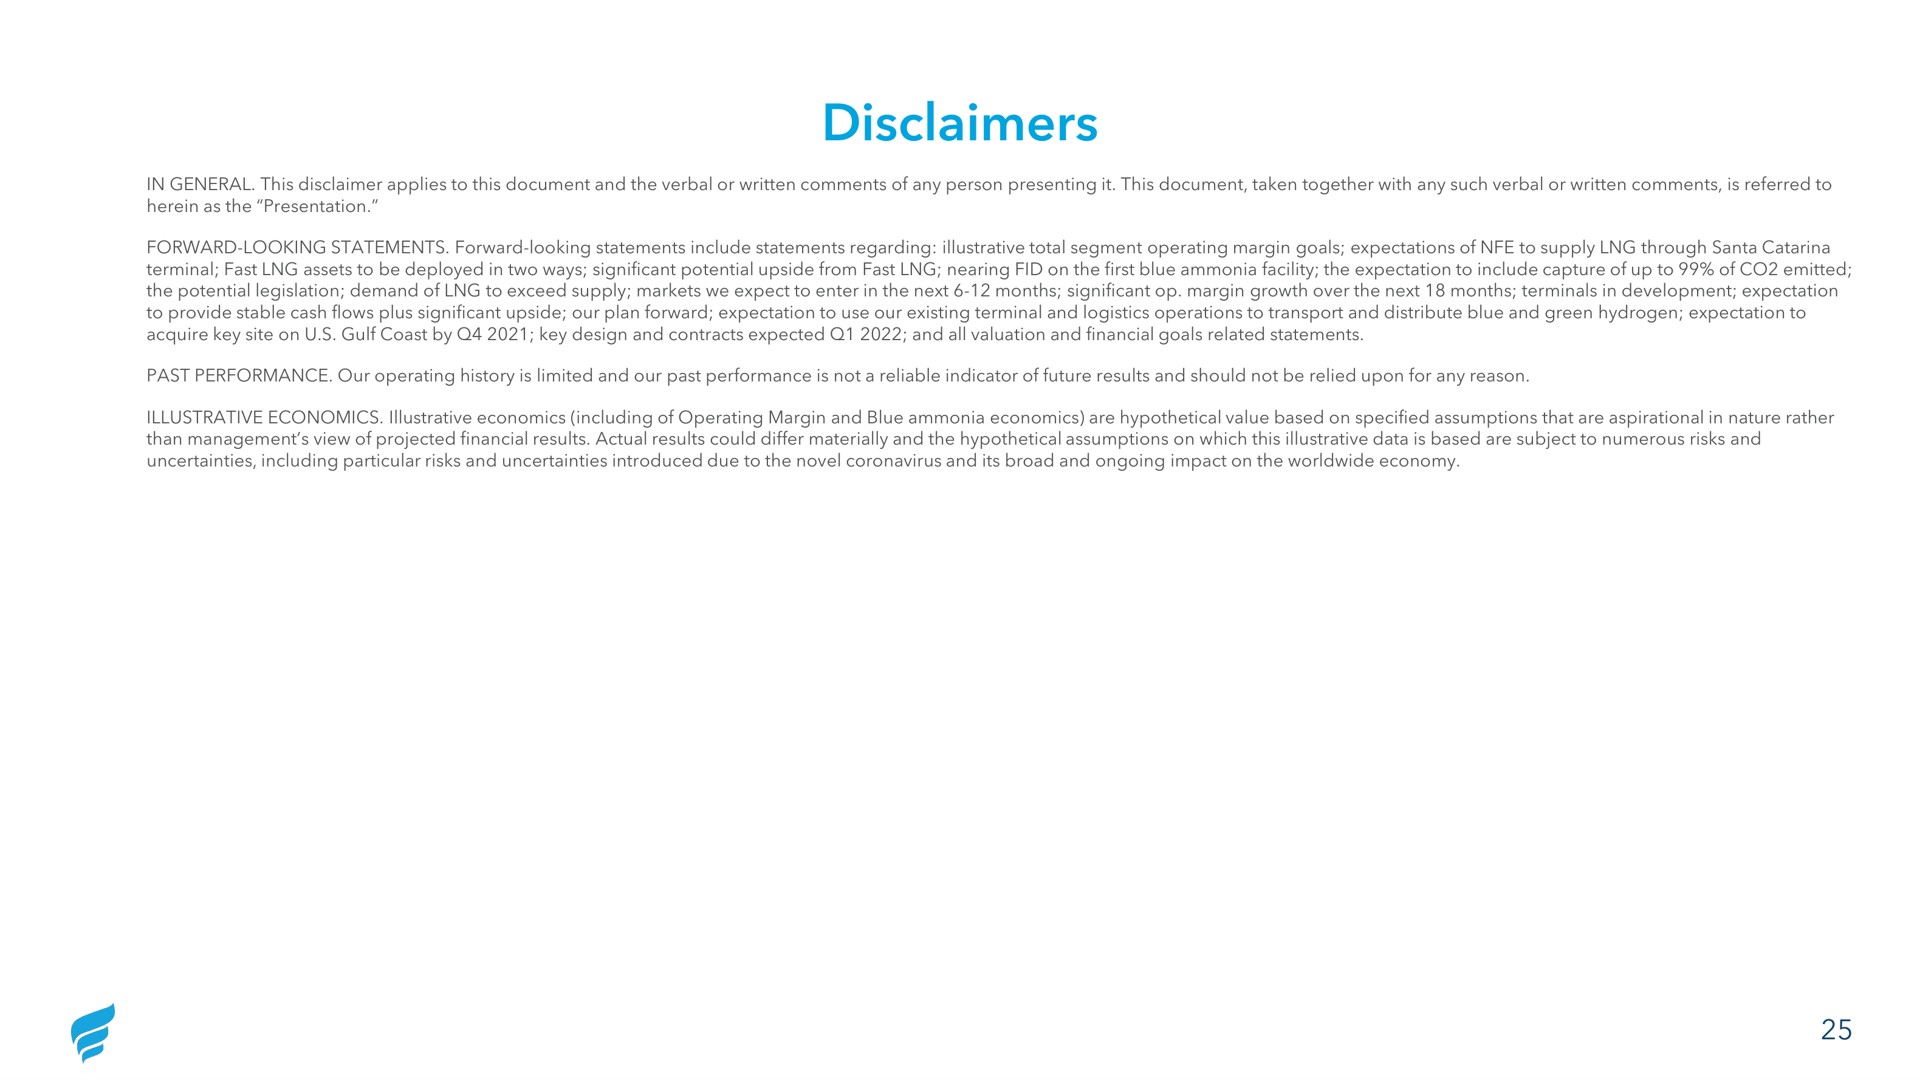 disclaimers | NewFortress Energy